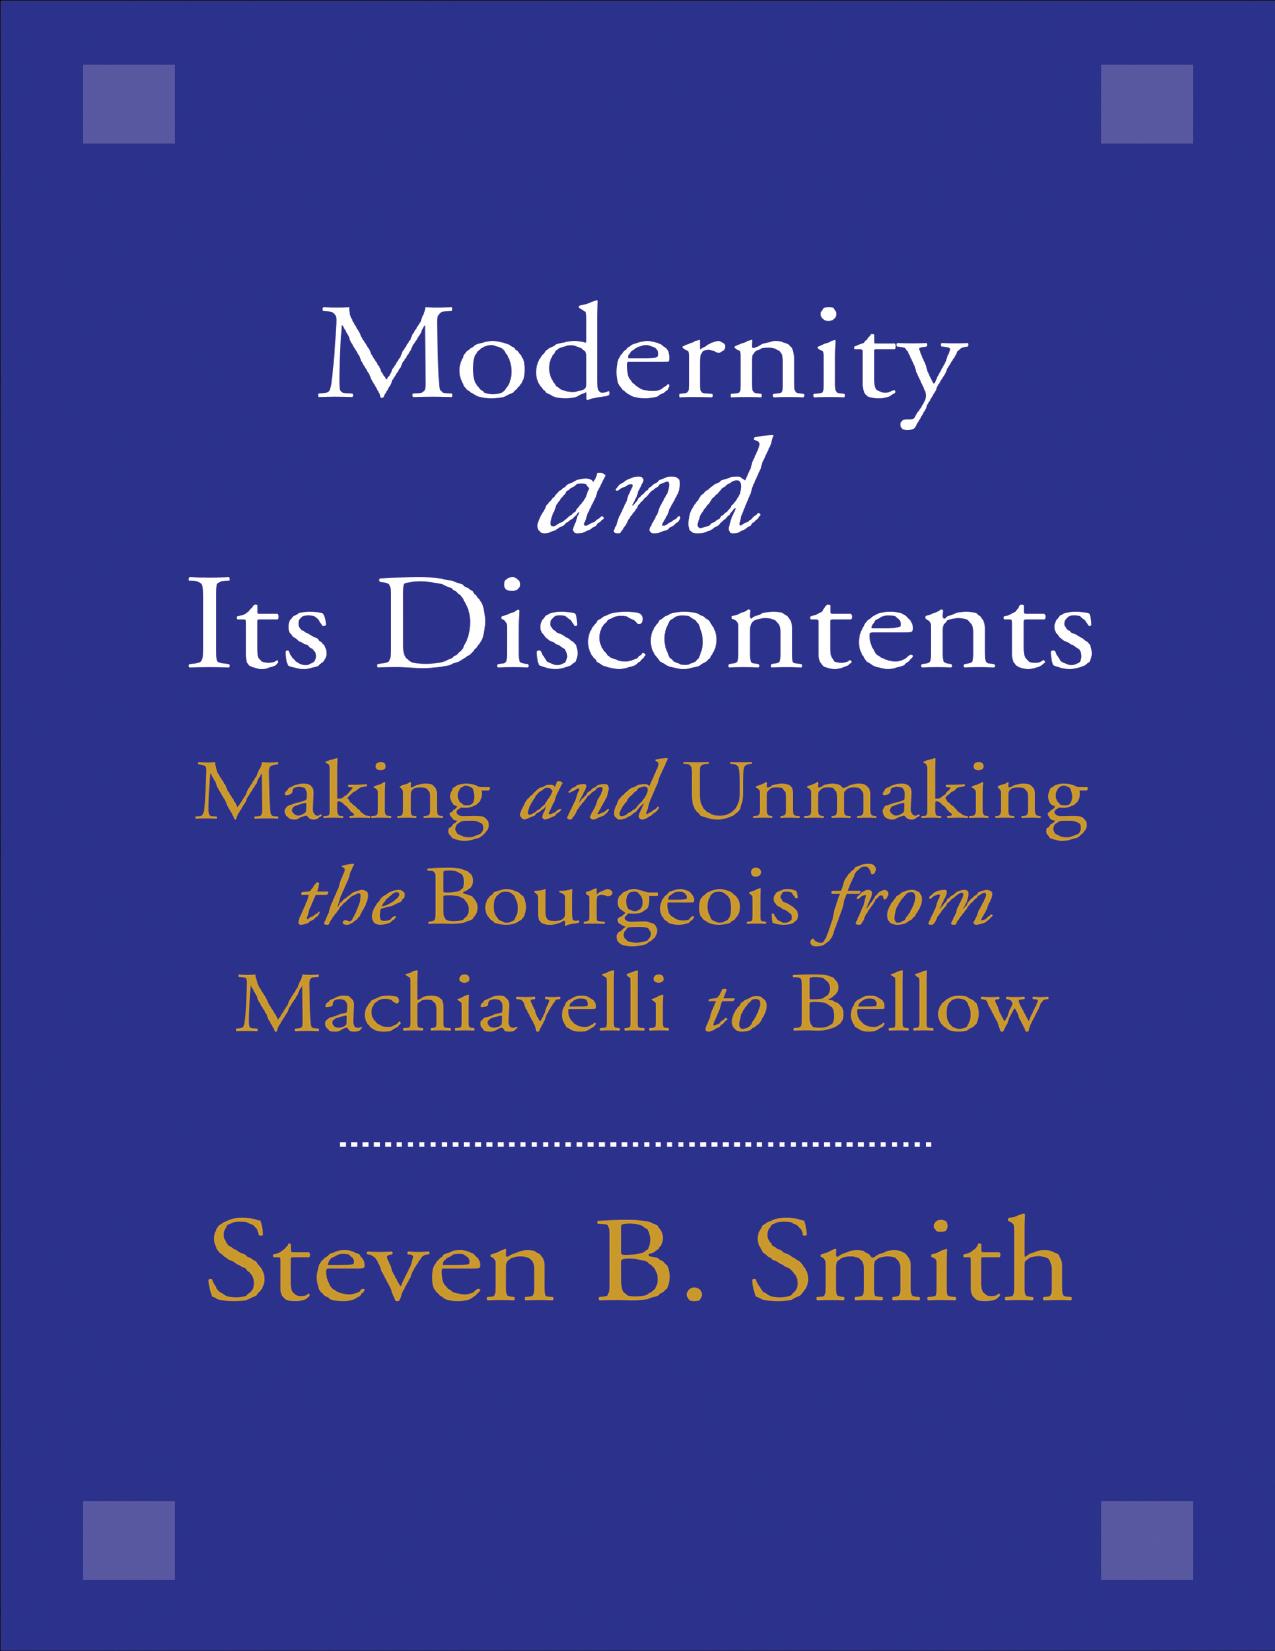 (eBook PDF)Modernity and Its Discontents by Steven B. Smith